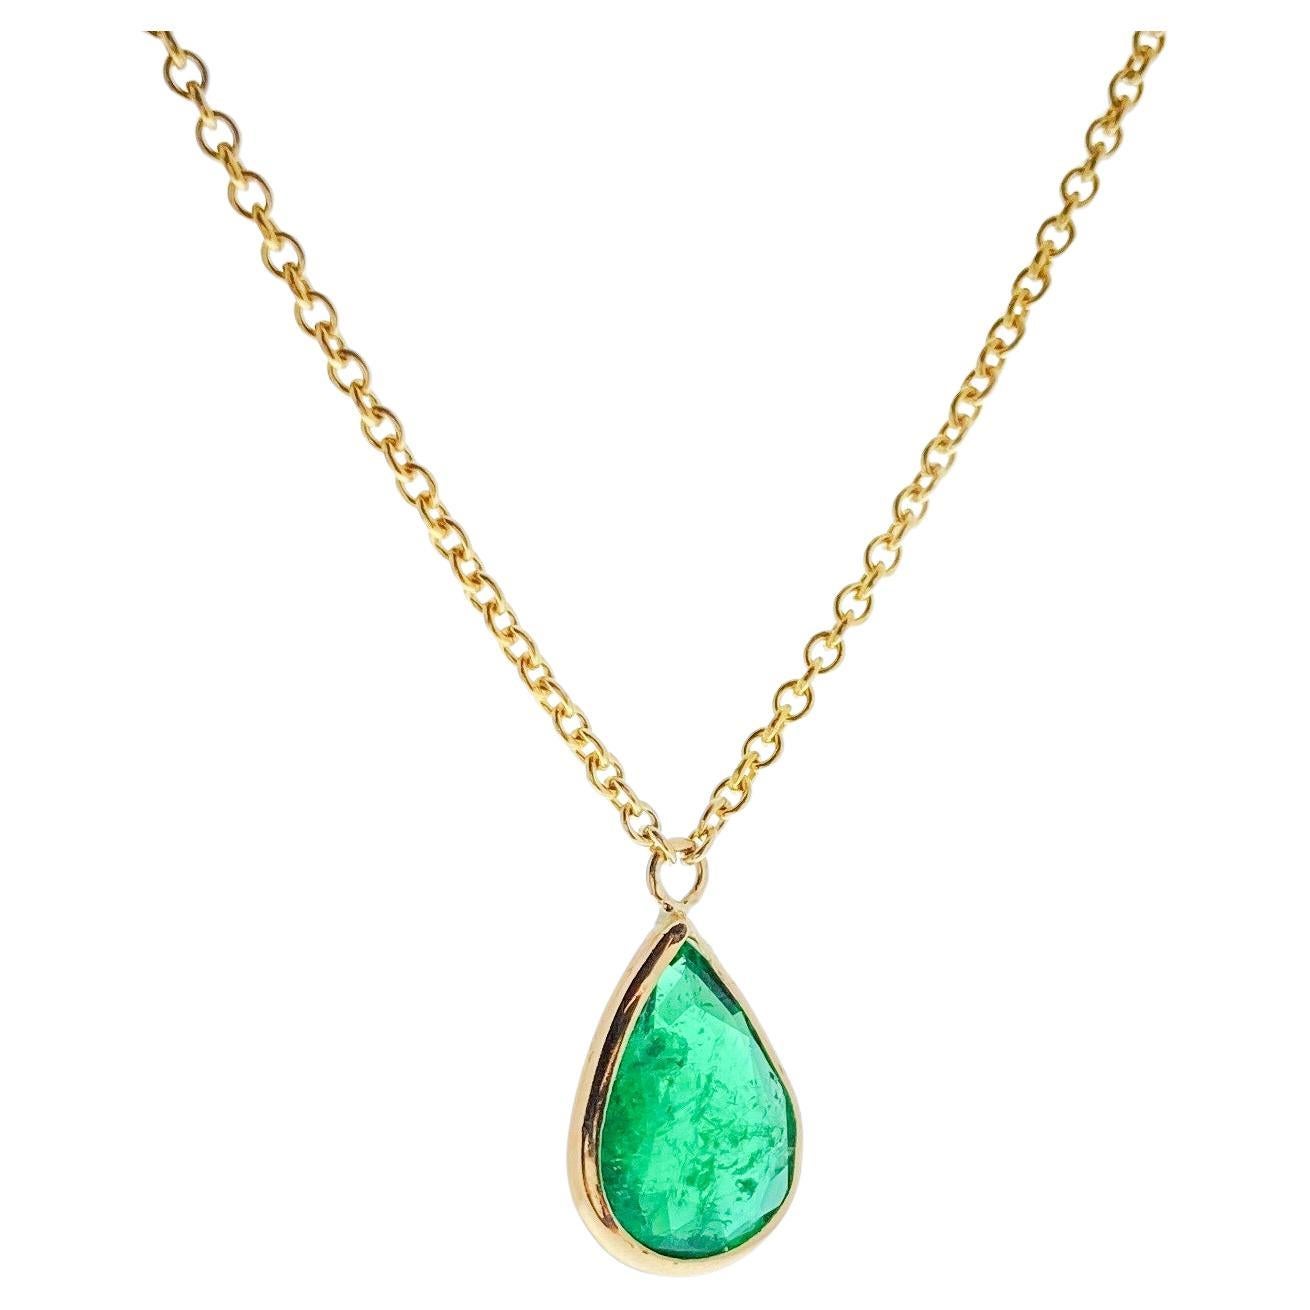 1.22 Carat Green Emerald Pear Shape Fashion Necklaces In 14K Yellow Gold For Sale